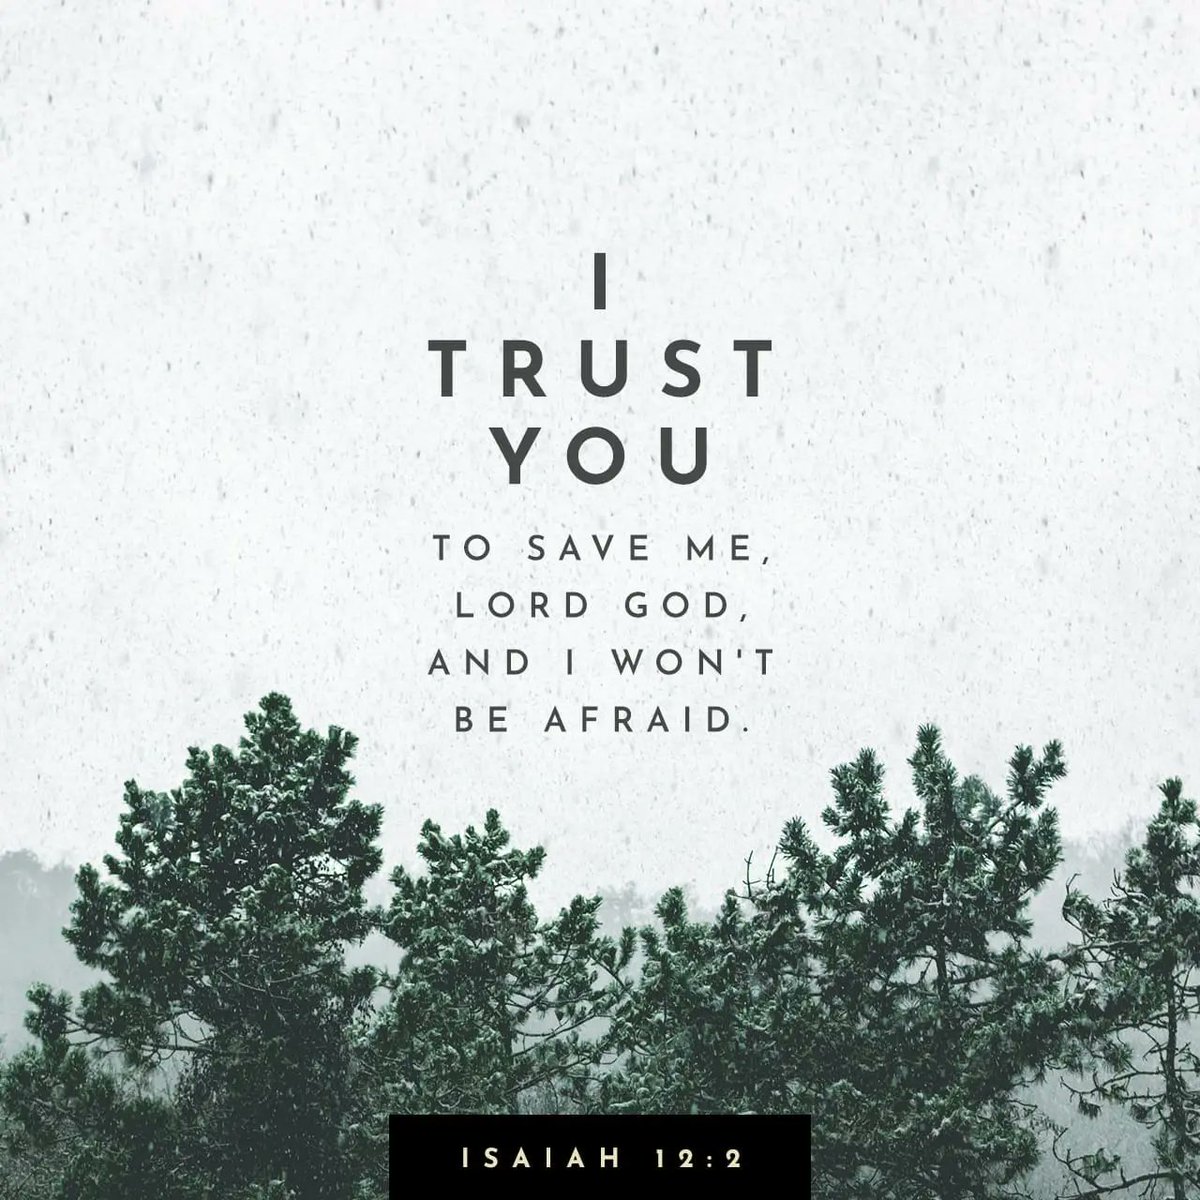 Isaiah 12:2 NLT
See, God has come to save me. I will trust in him and not be afraid. The LORD GOD is my strength and my song; he has given me victory. #DailyDevo #DailyVerse Have a great day wherever you are in this great big world 💖